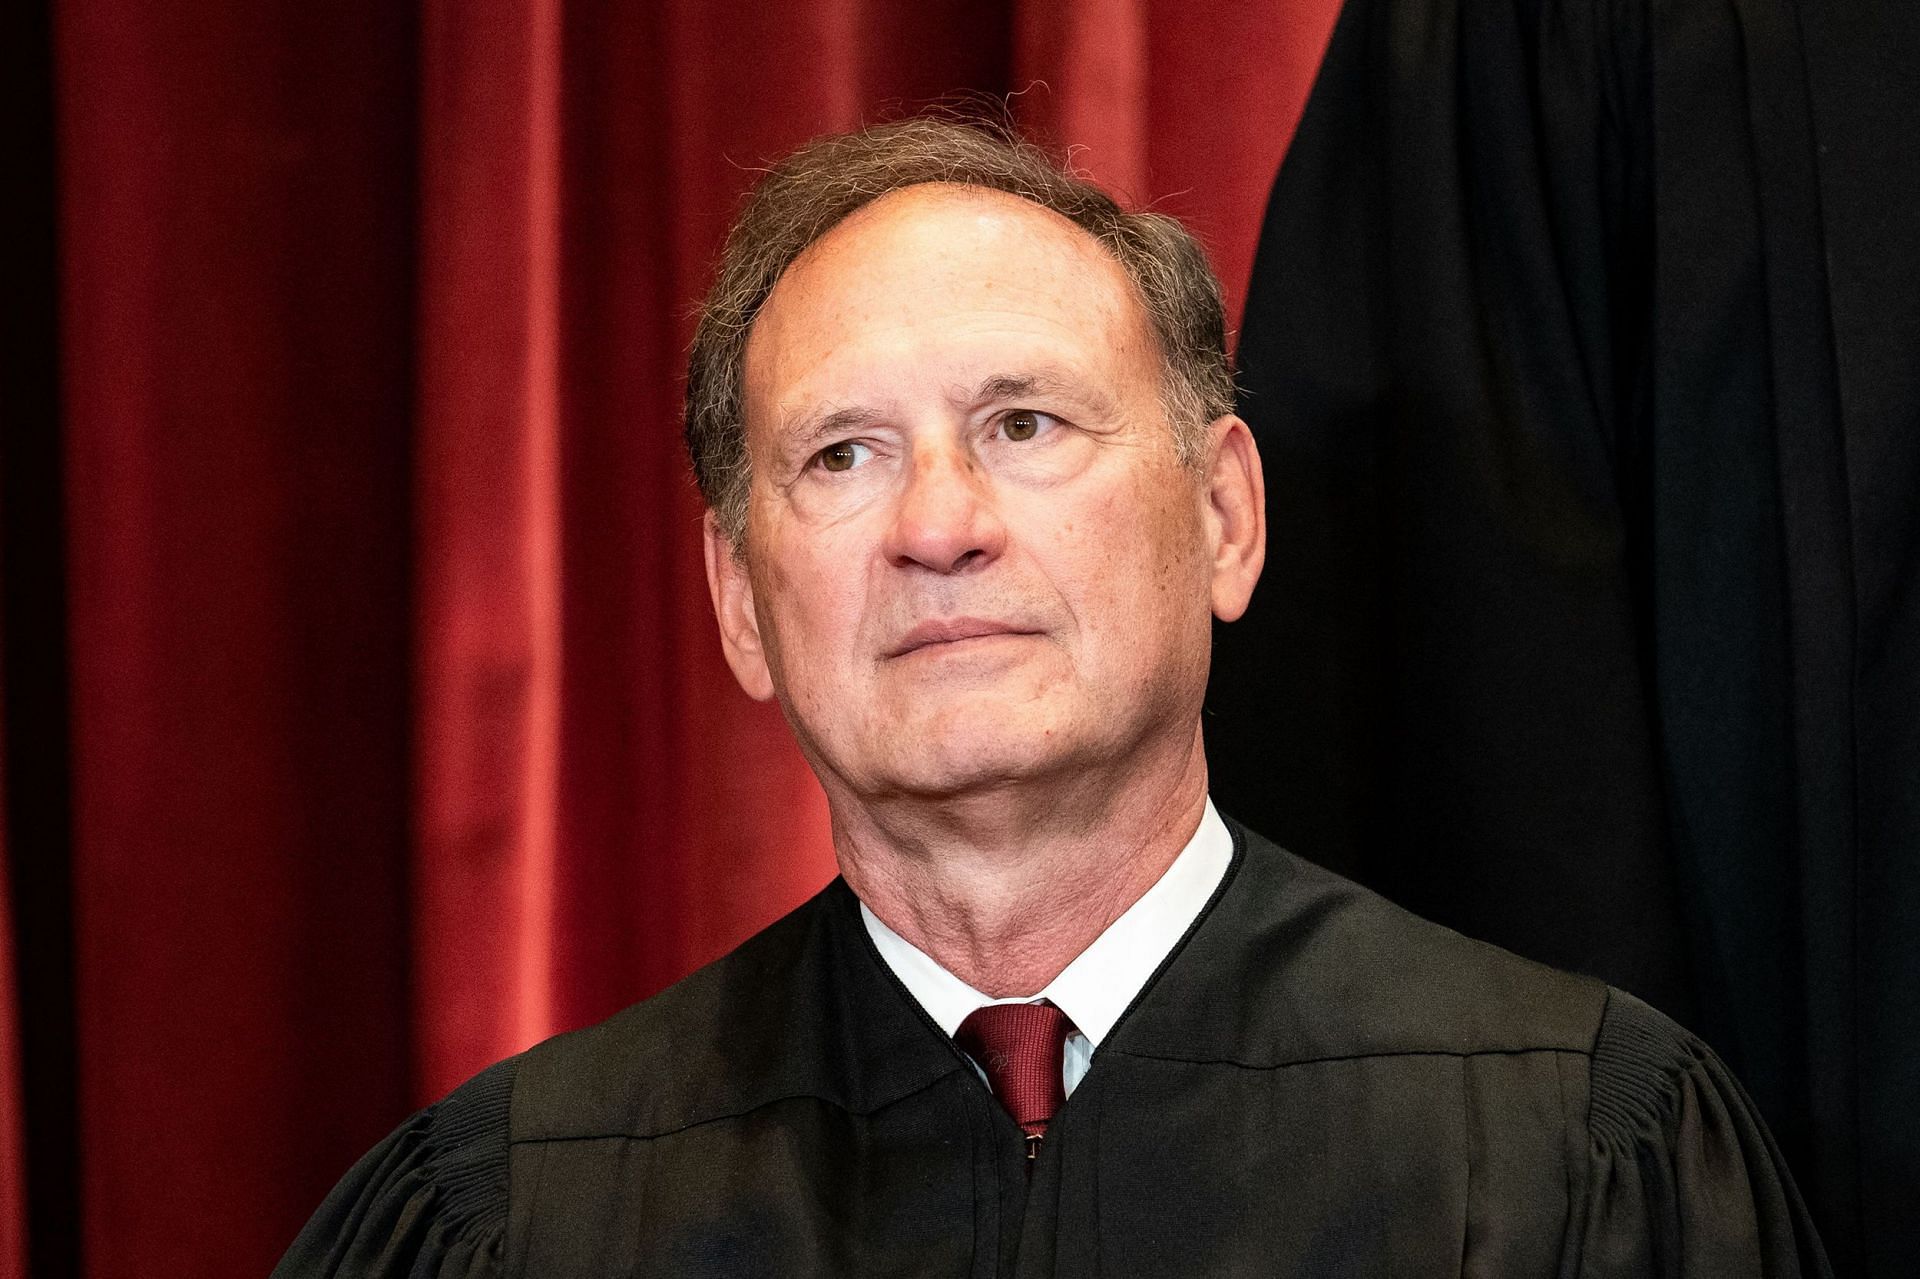 Justice Alito jokes about Black children in KKK outfits (Image via Getty Images)